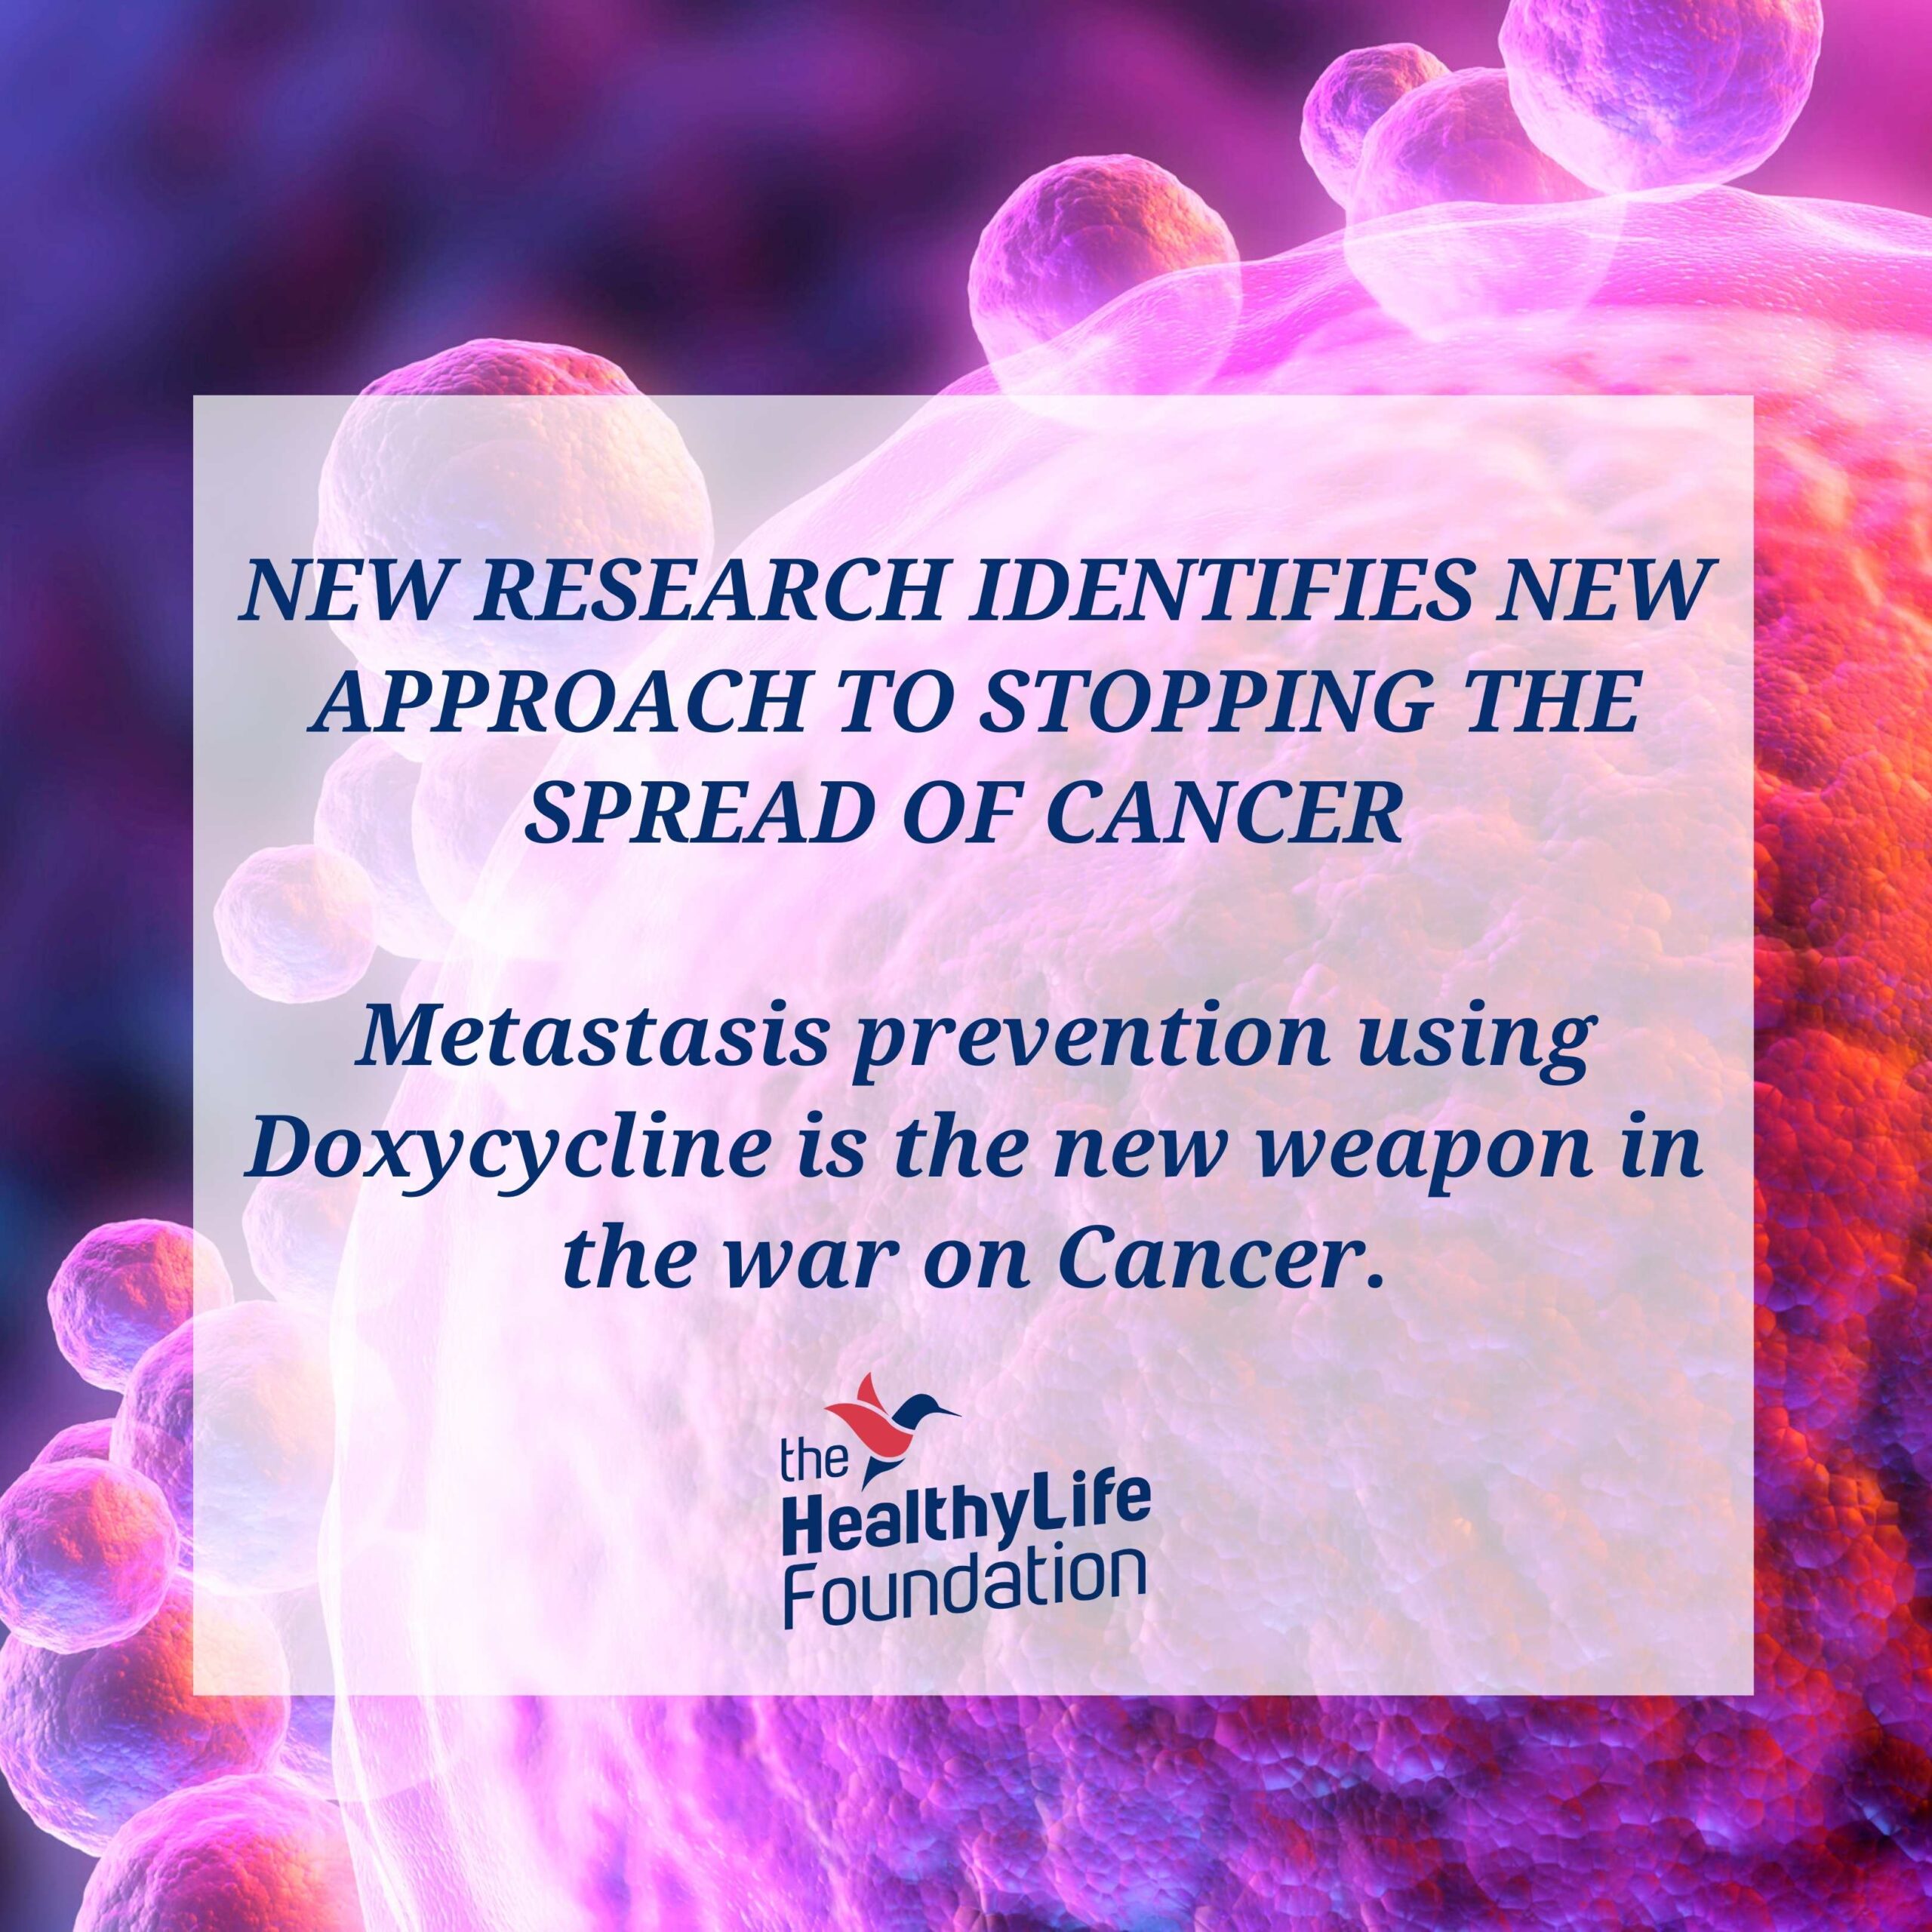 Metastasis prevention using Doxycycline is the new weapon in the war on Cancer